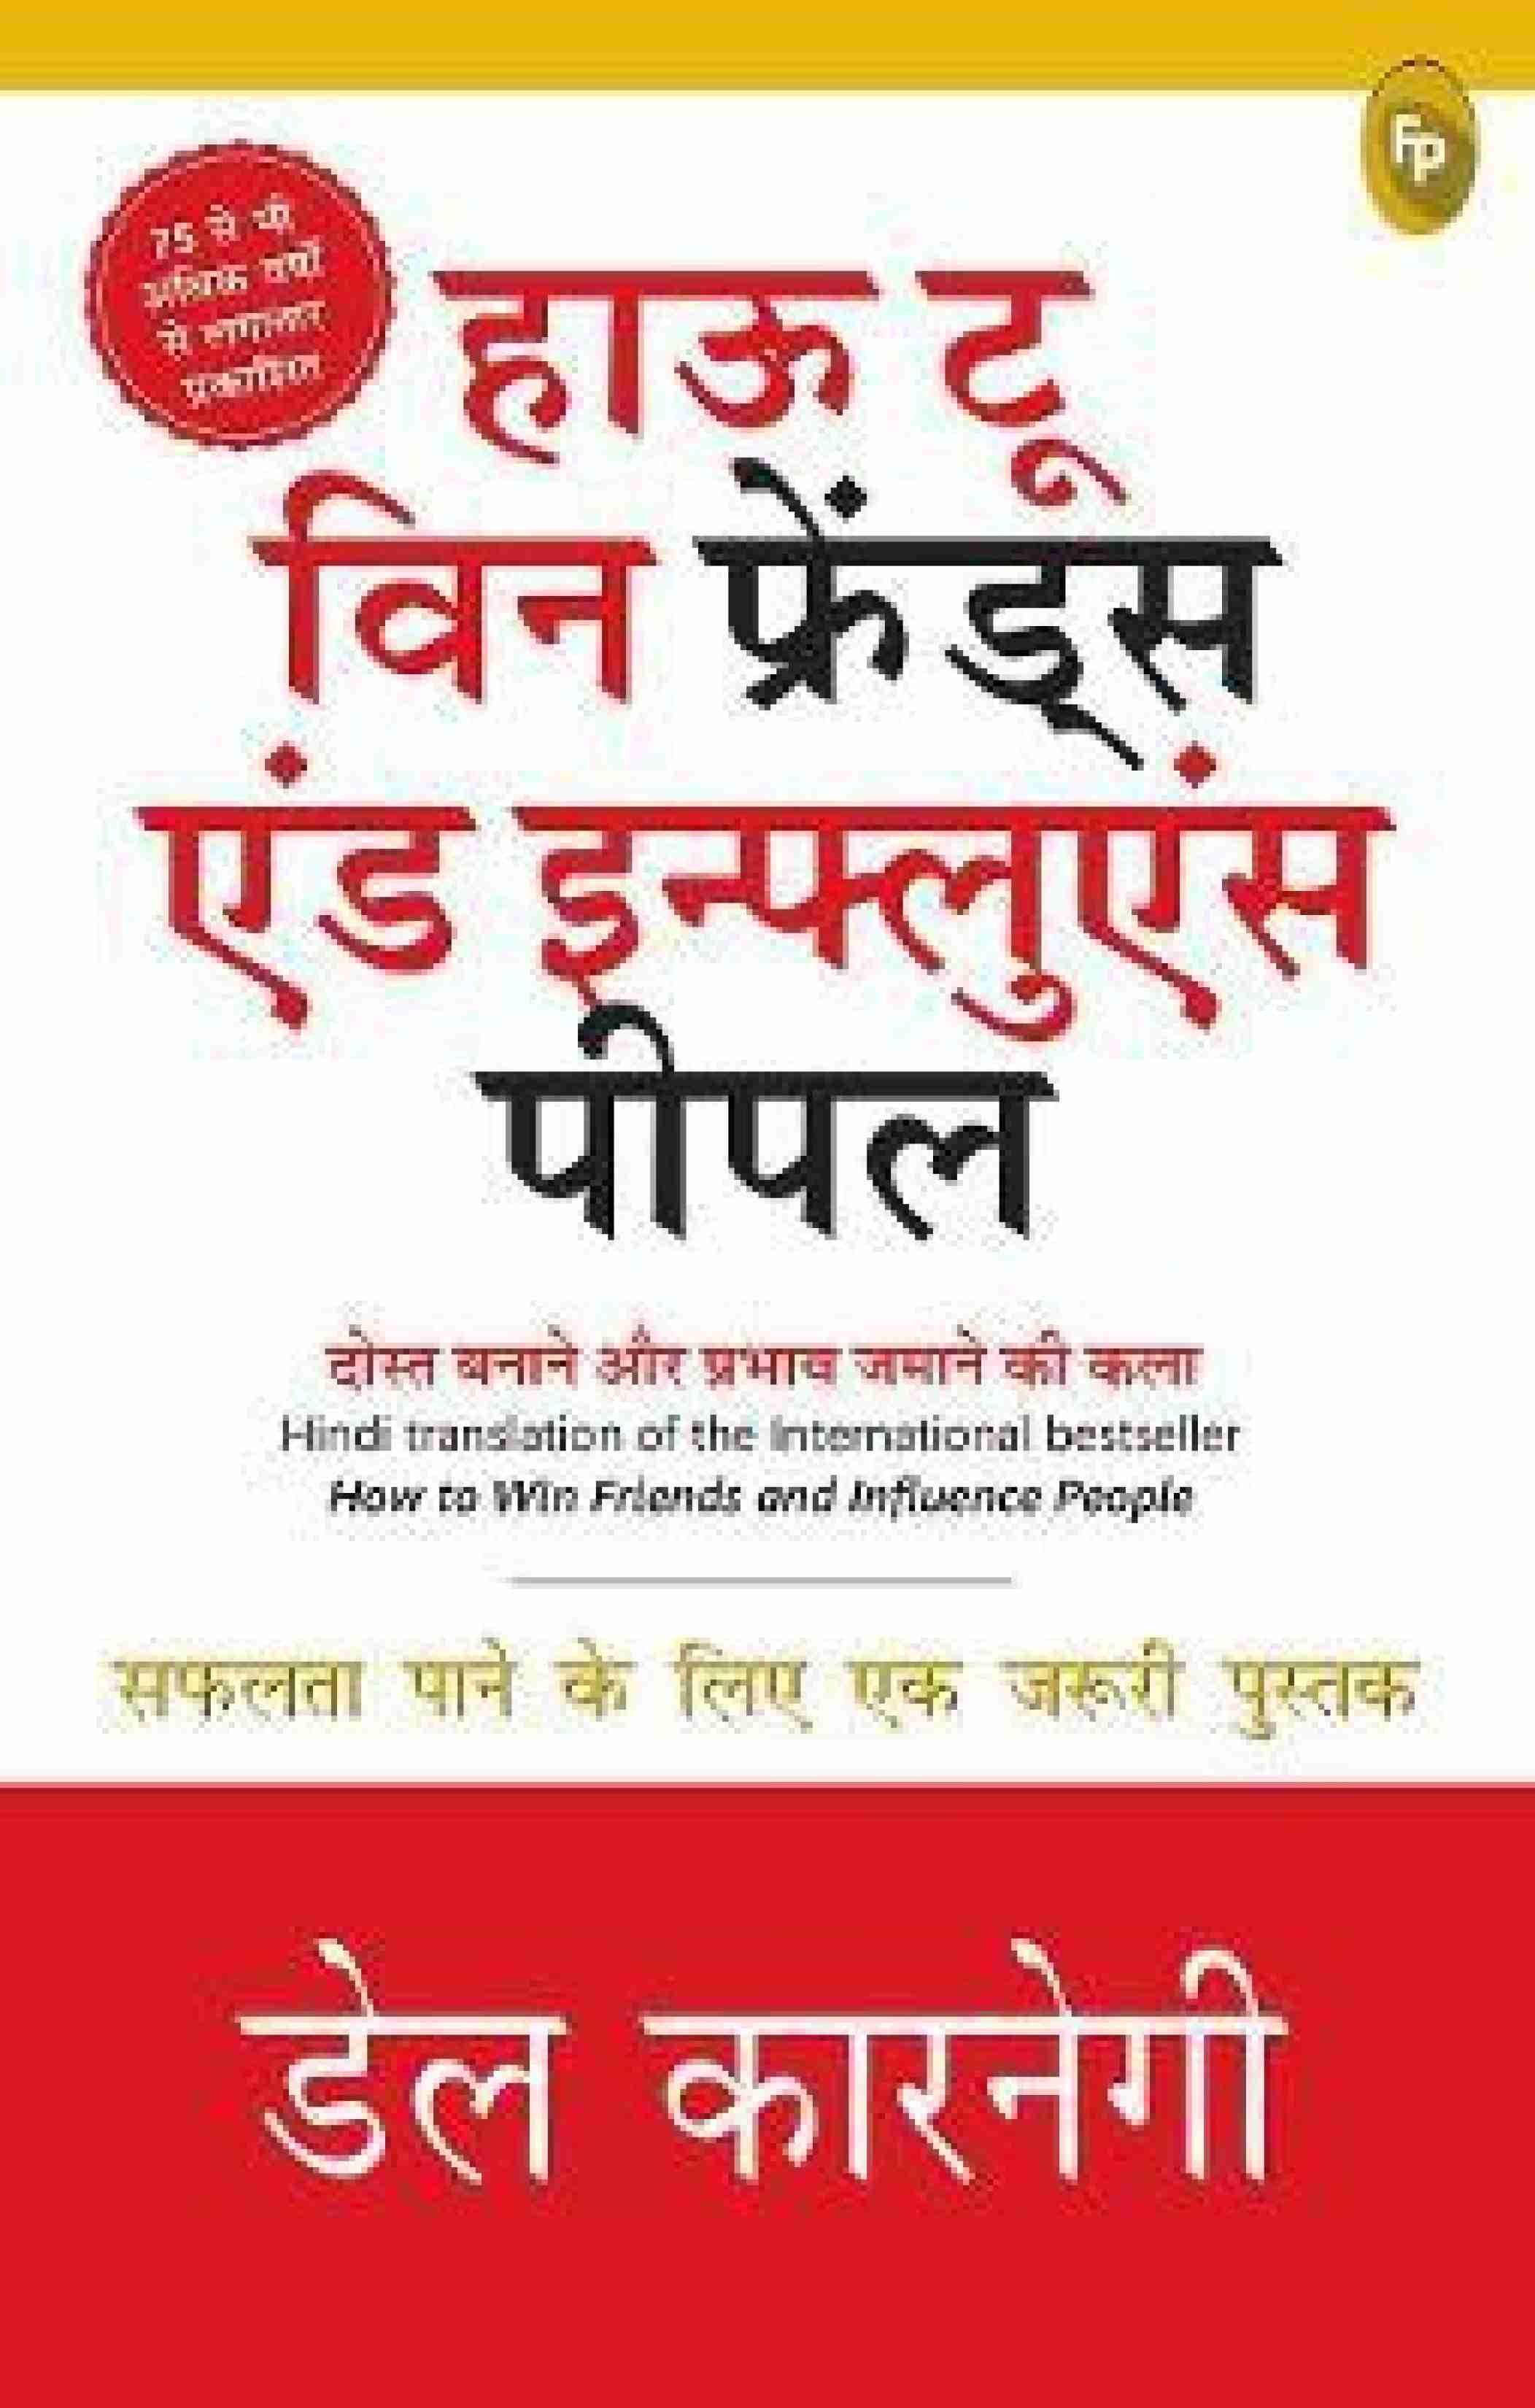 How to Win Friends and Influence People in Hindi Pdf